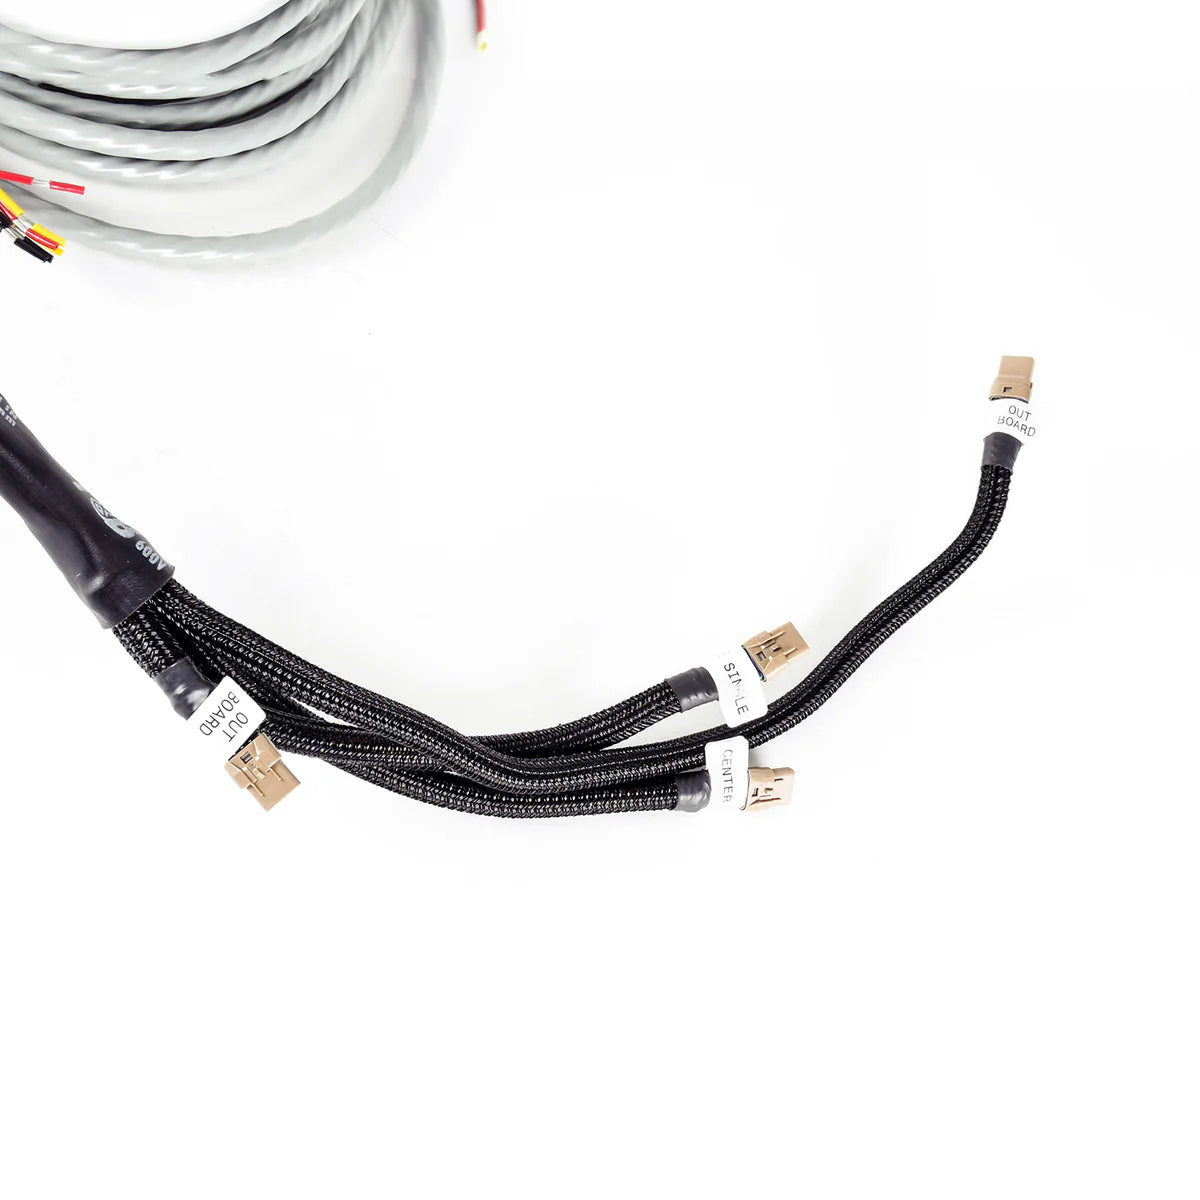 Wiring Harness for Antenna Mounts with Tomar LED Lights